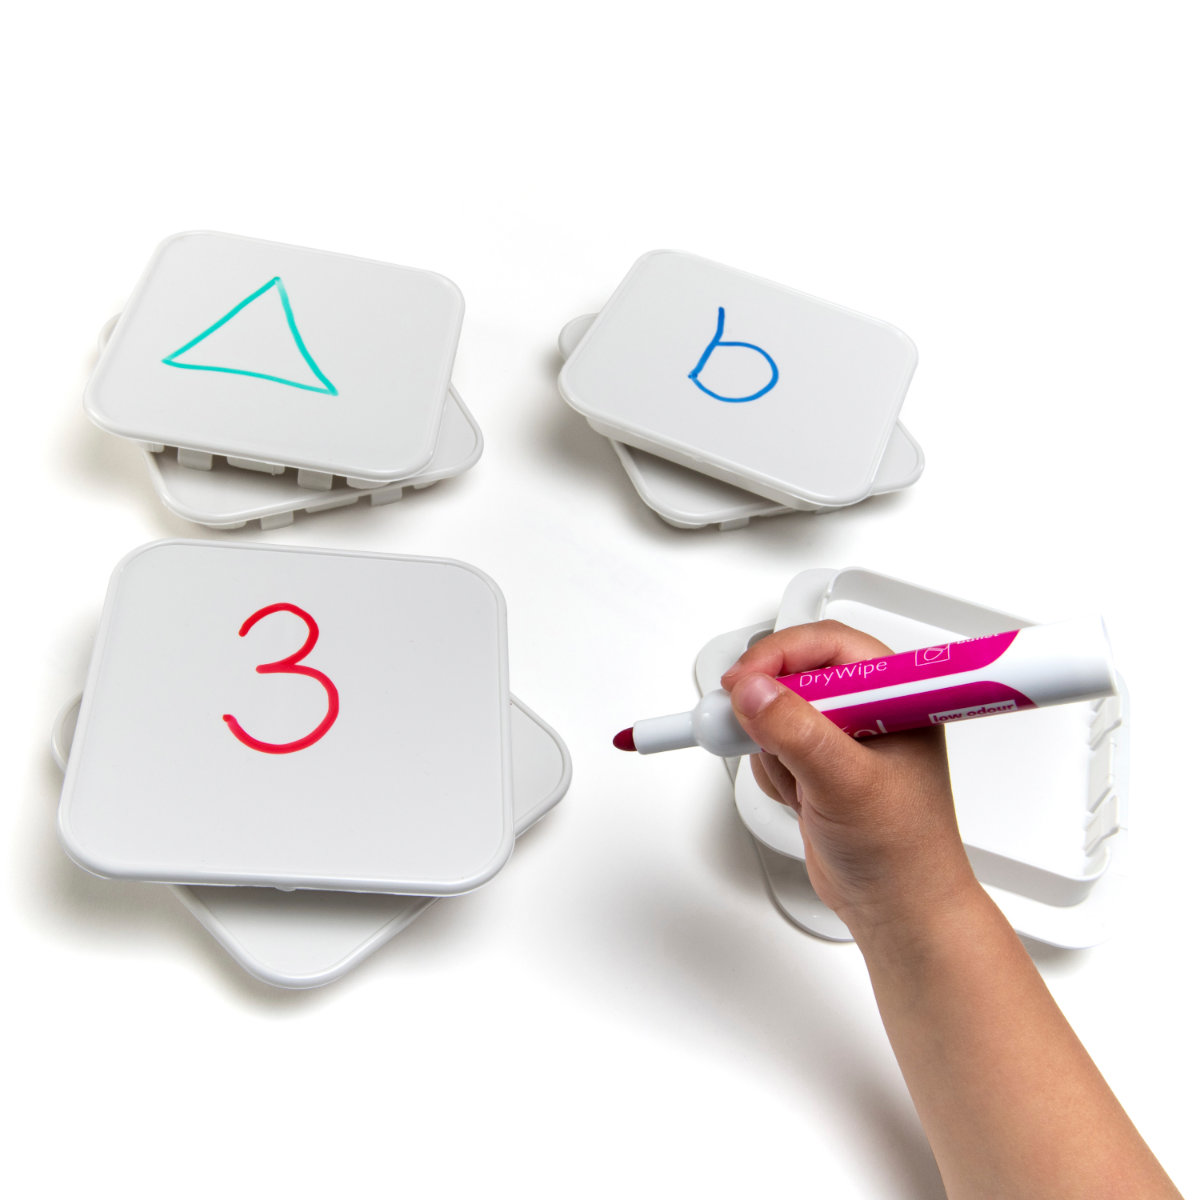 Giant Polydron Clip-In Write On-Wipe Off Panels Set